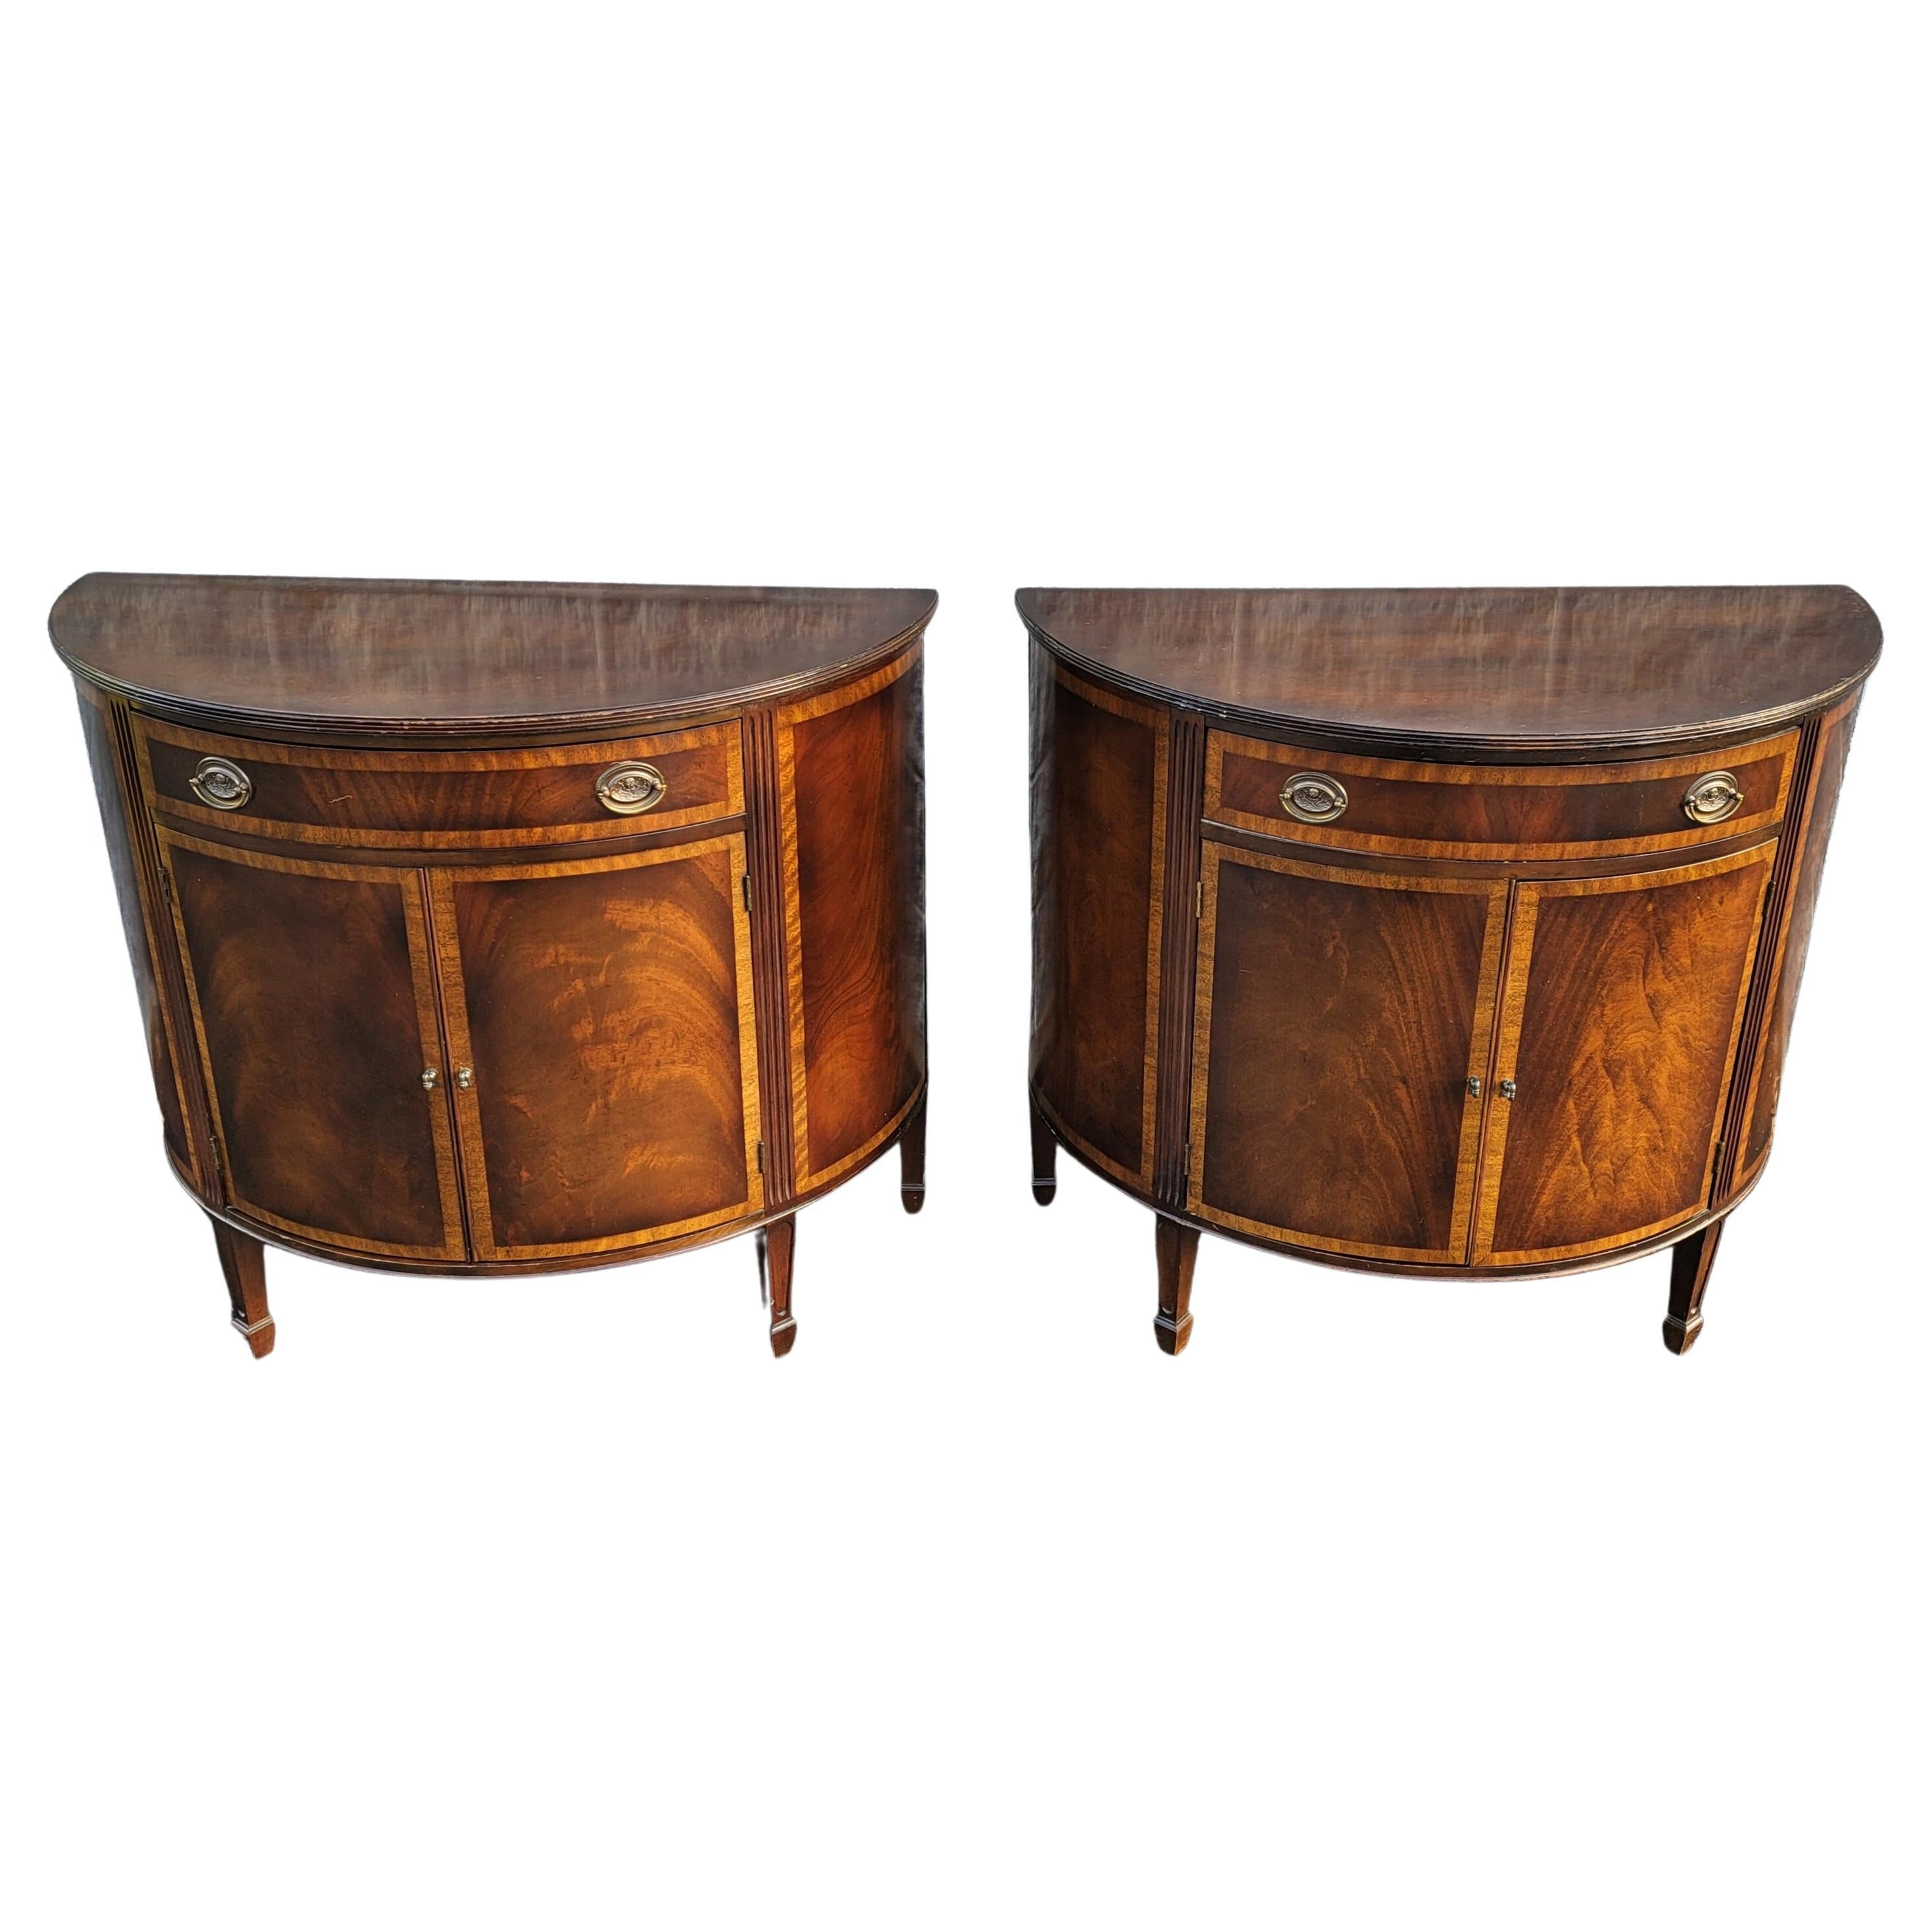 Gorgeous mid-19th centruty George III Demilune banded flame mahogany commodes cabinets in good antique condition with a large top drawer, Double front doors that open to reveal a tri level adjustable height shelf. Measures 38